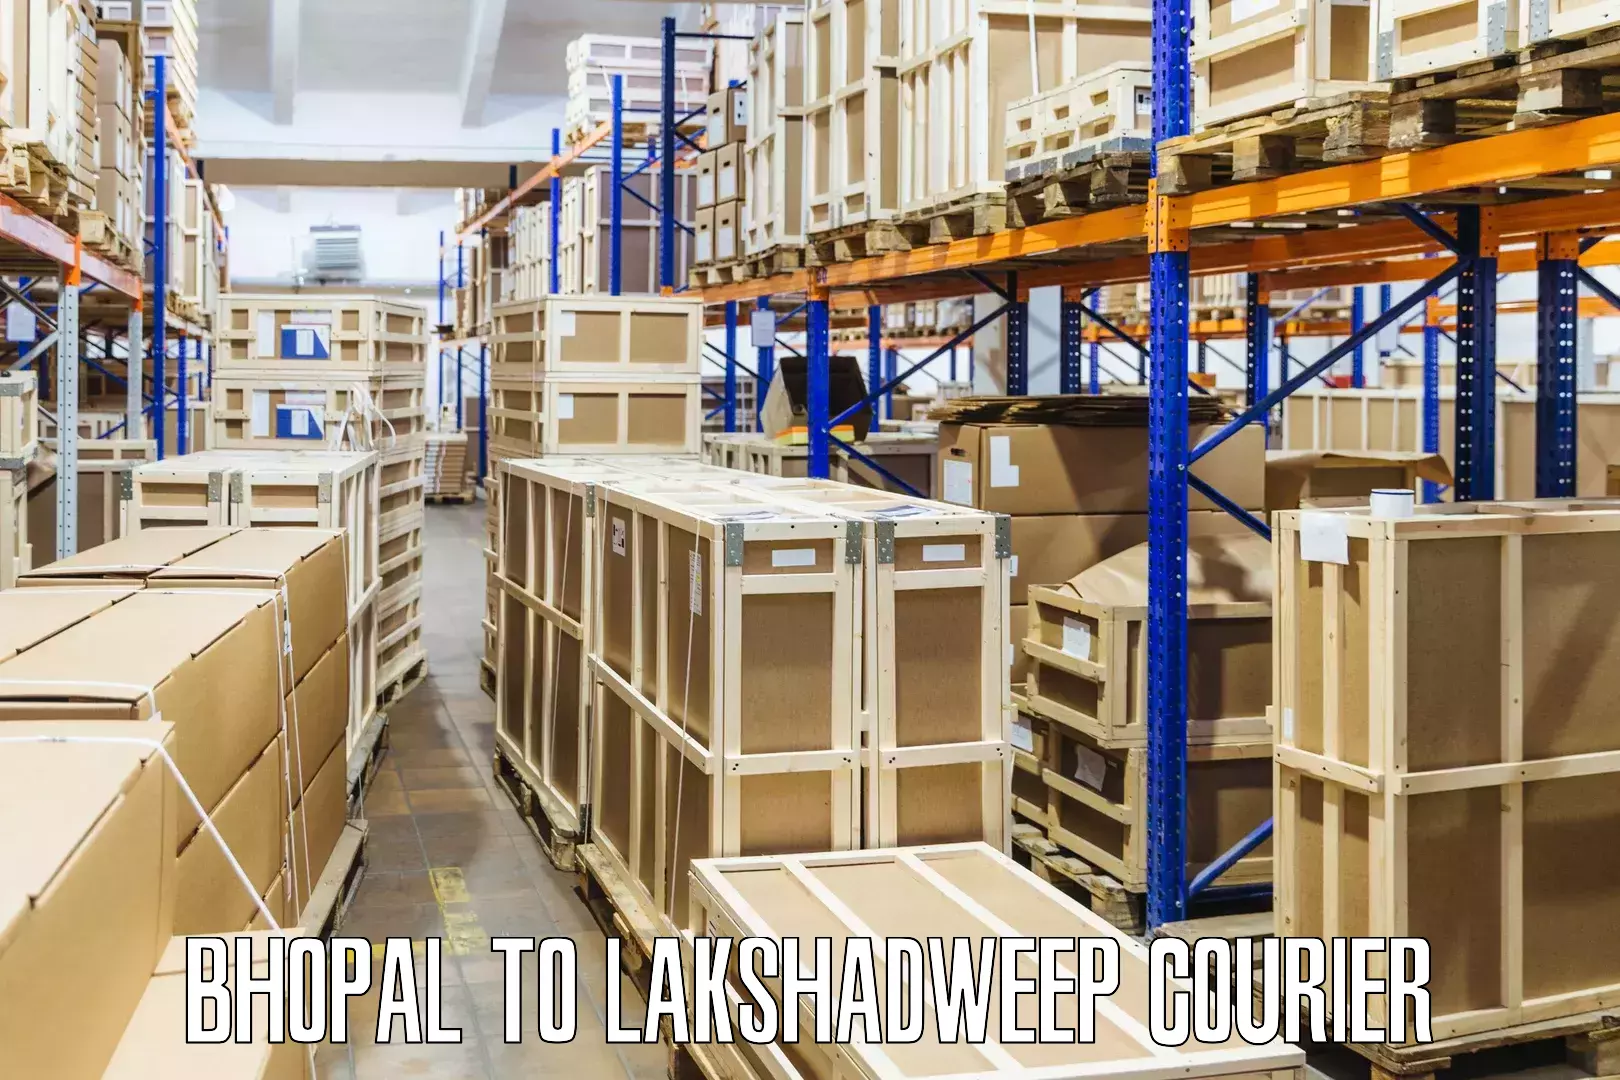 Nationwide shipping capabilities in Bhopal to Lakshadweep